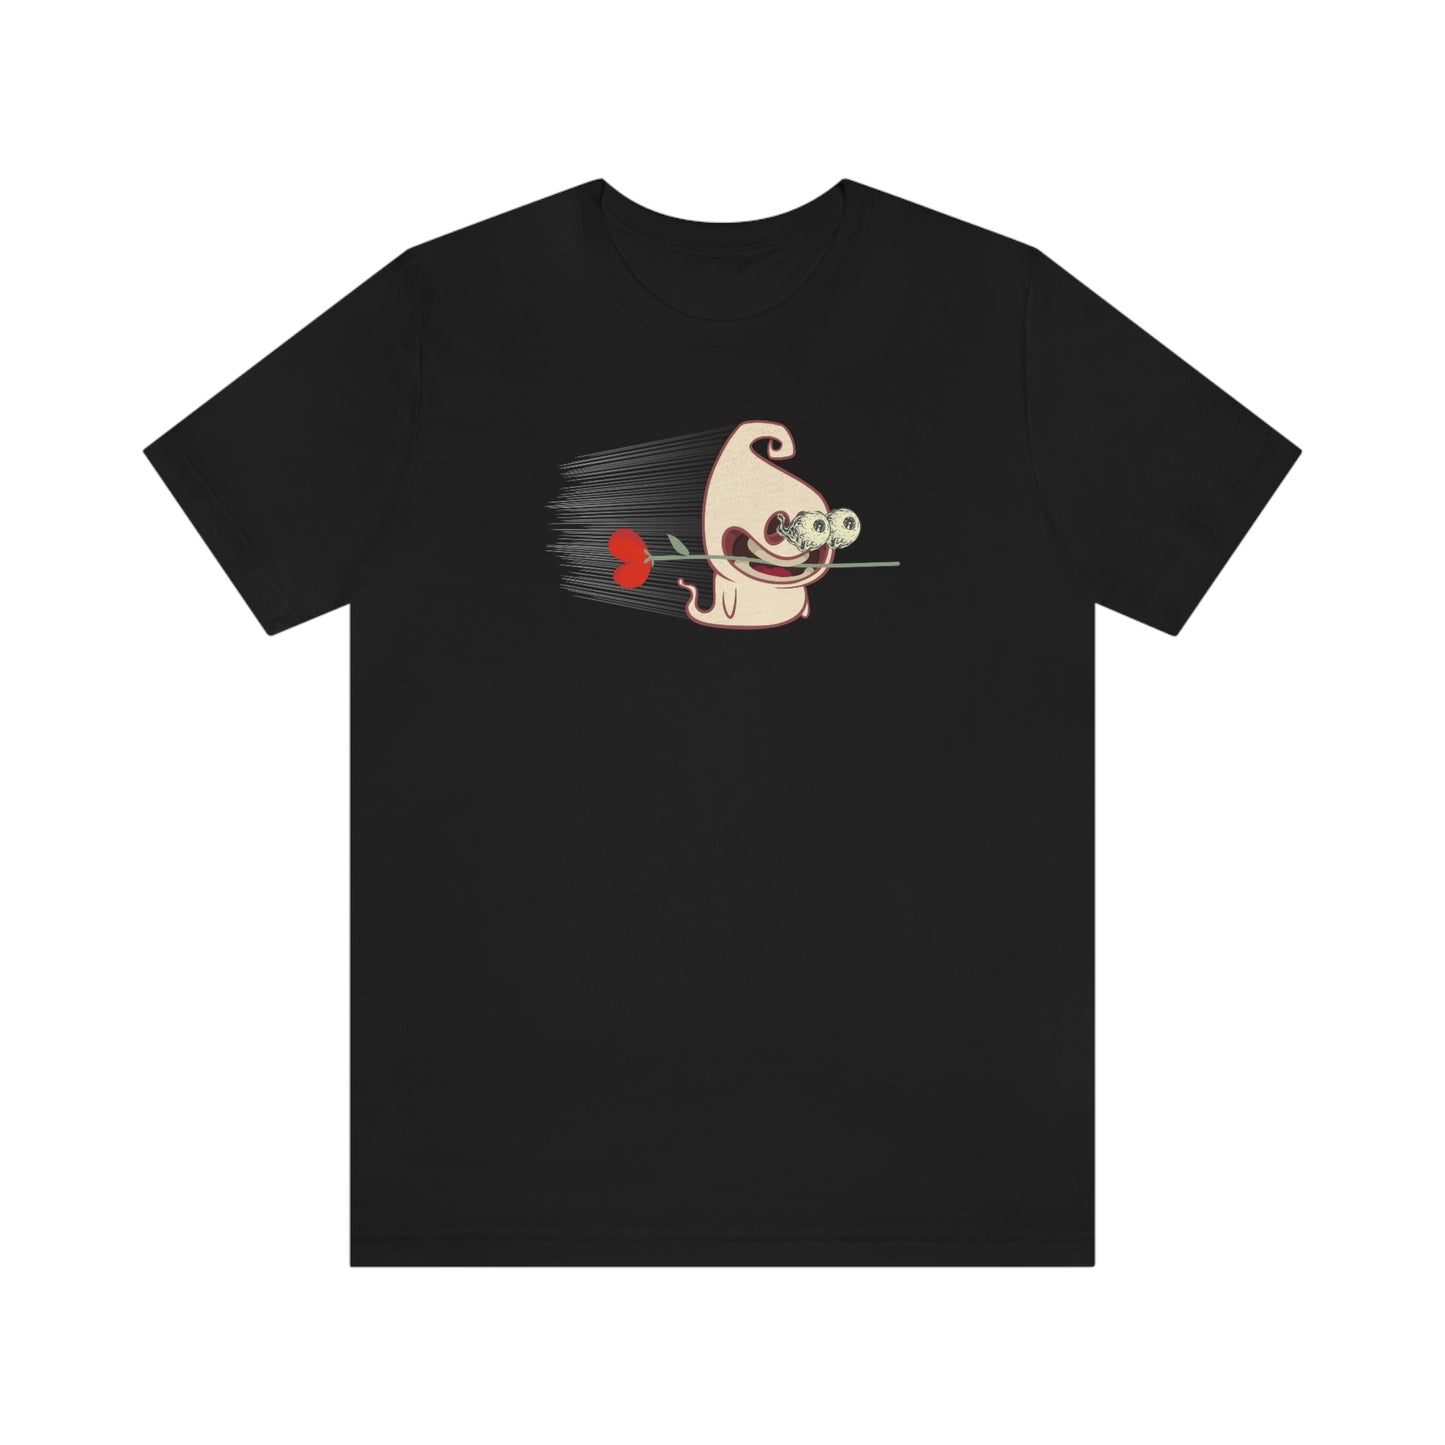 ghosted t shirt